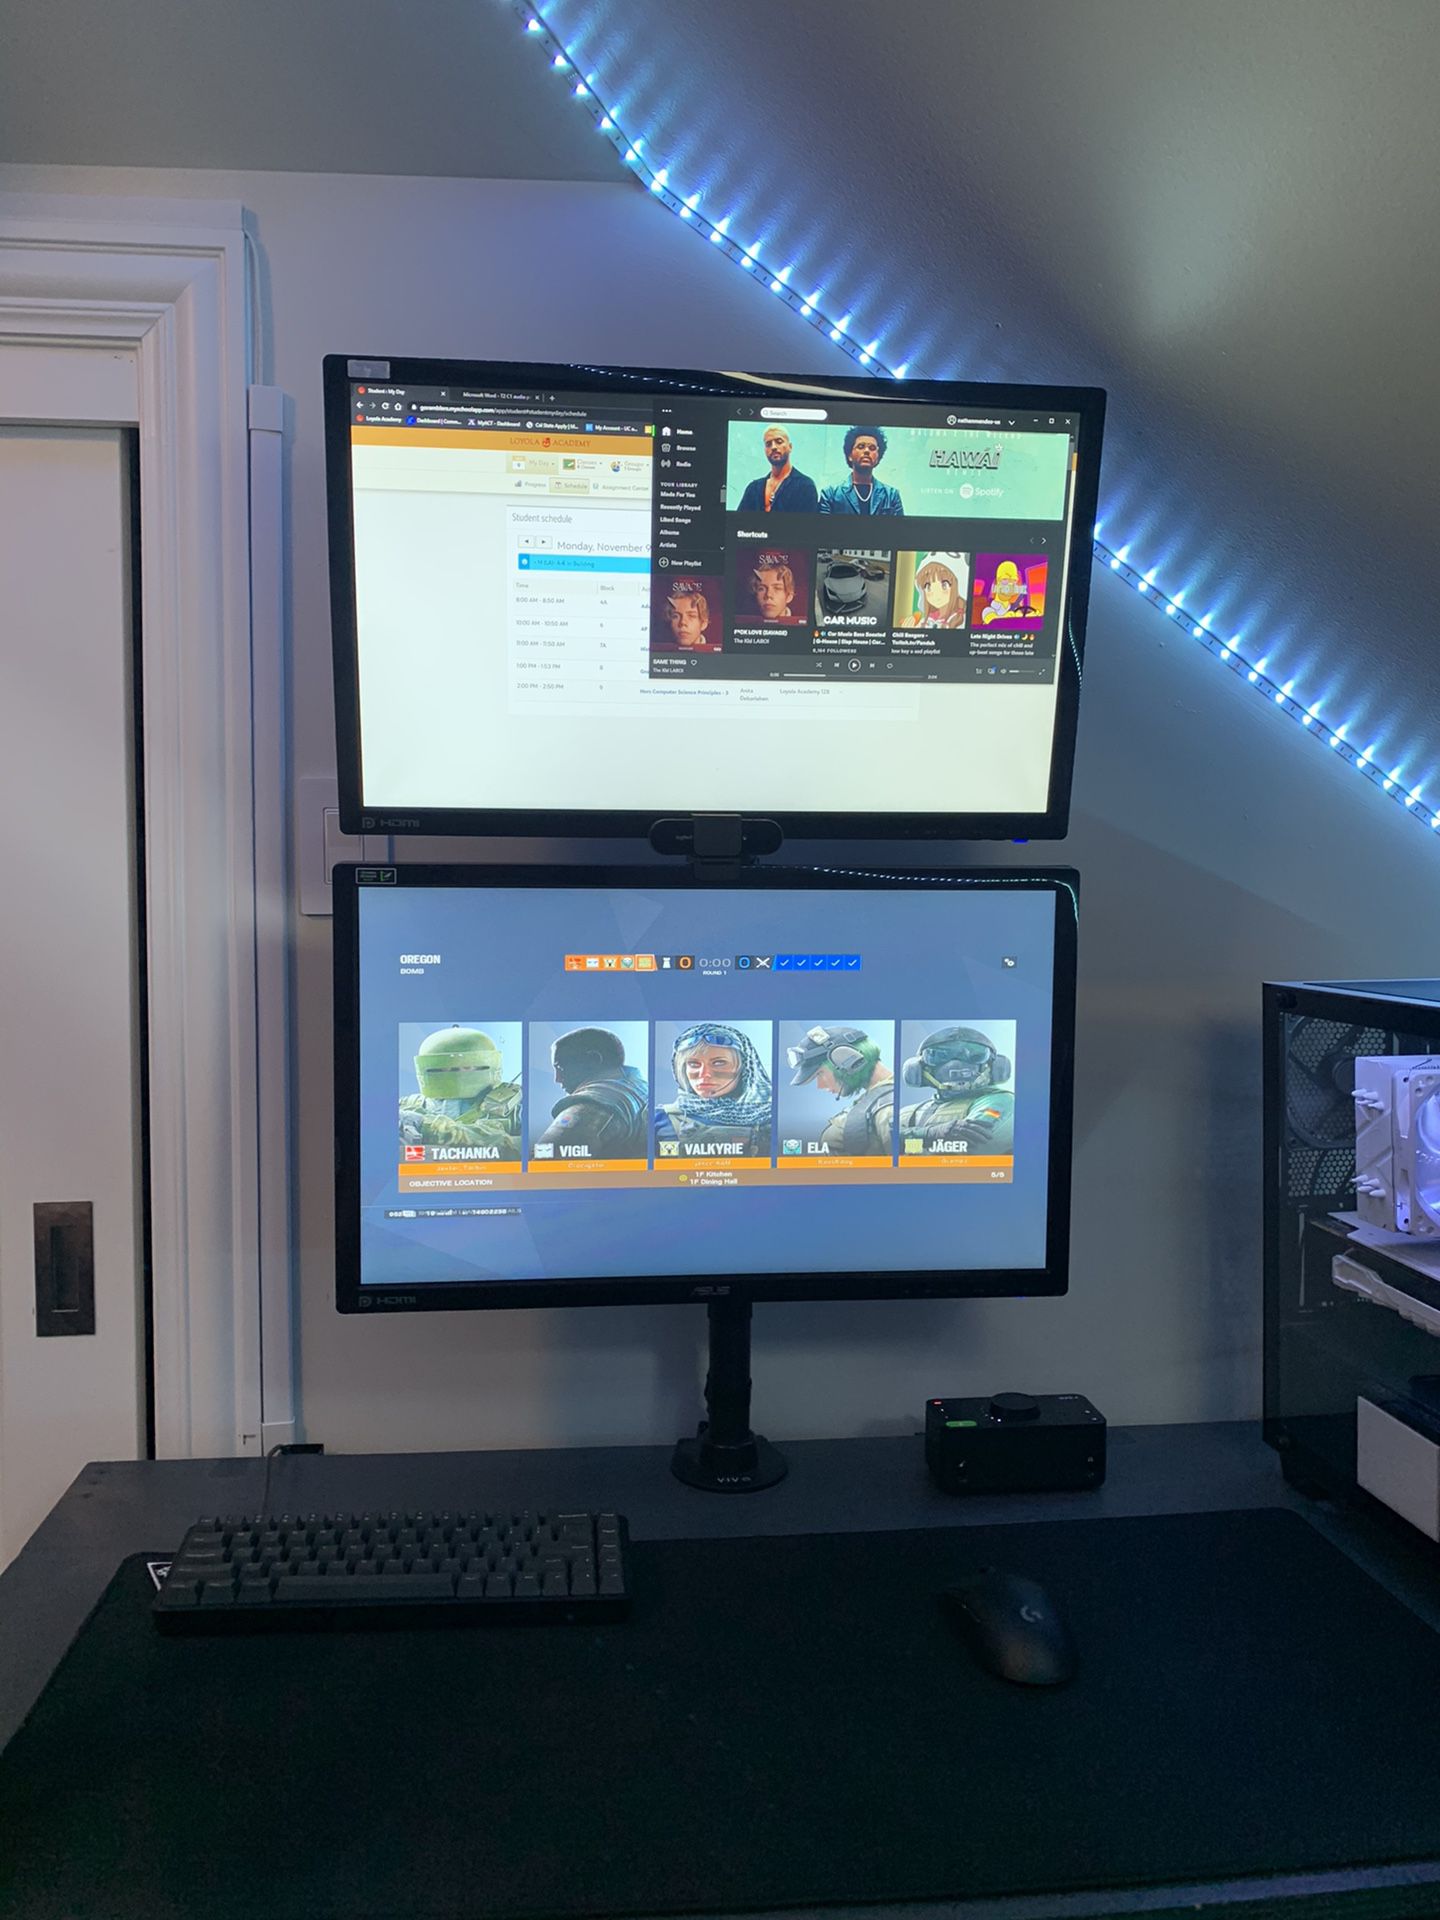 Heavy Duty Vovo Stacked Monitor Arm Up To Two 32 Inch Monitors With Two Types Of VESA Mounting Holes